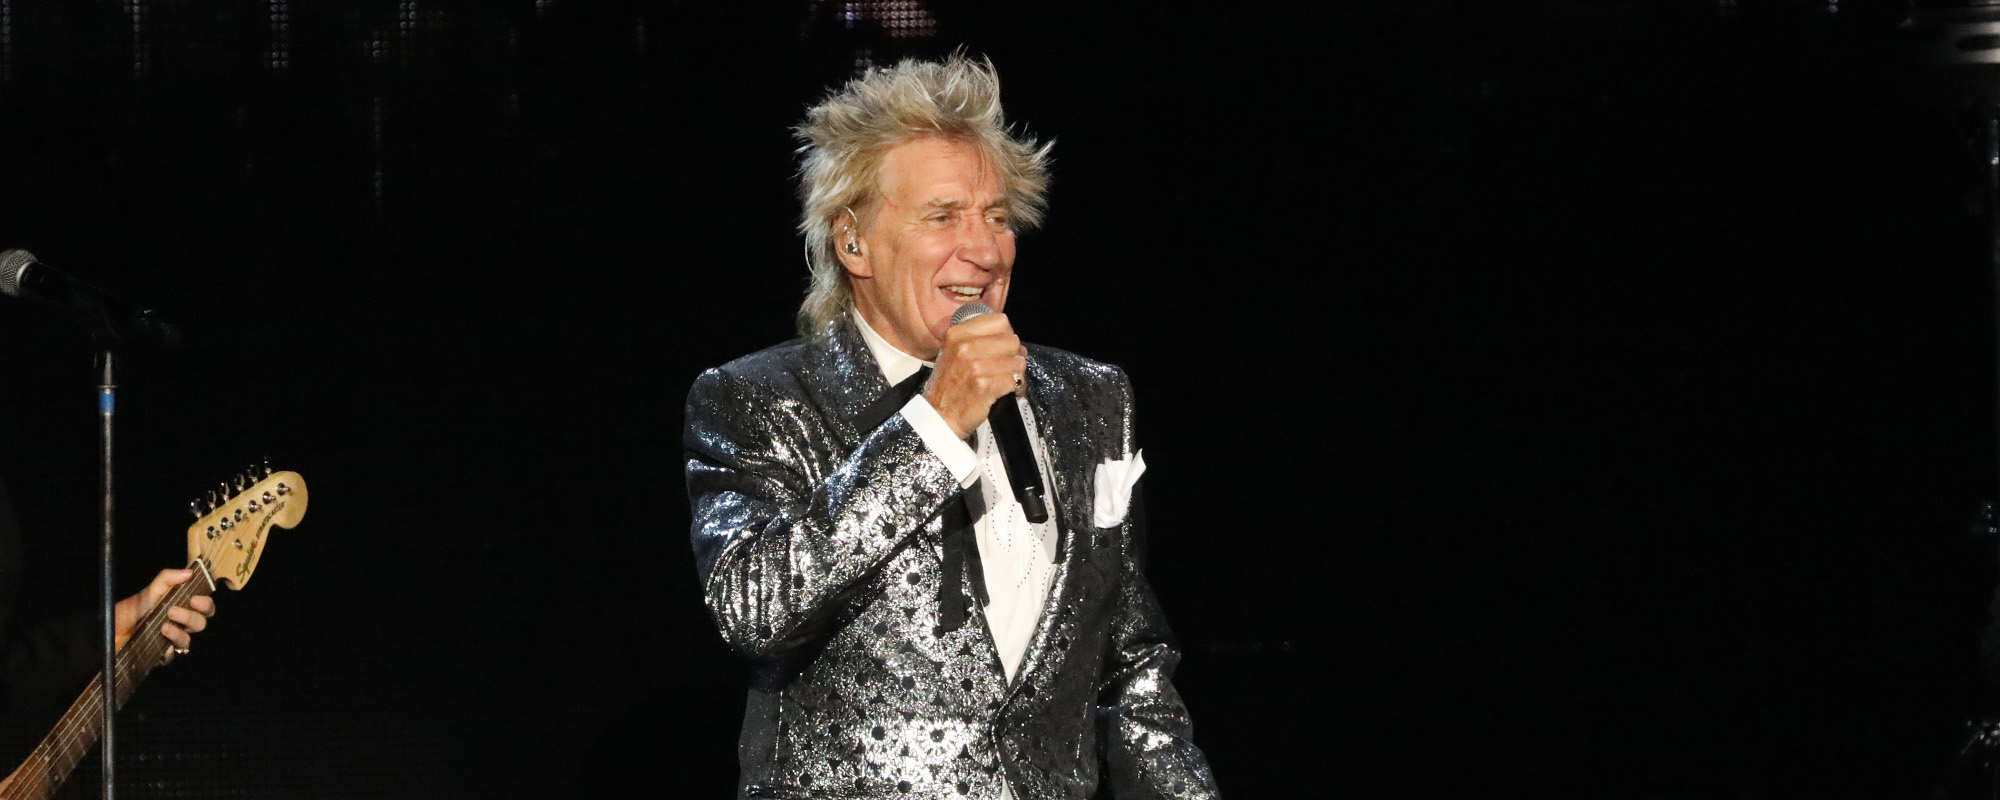 Rod Stewart Says He’s Ready to Leave Rock and Roll Behind